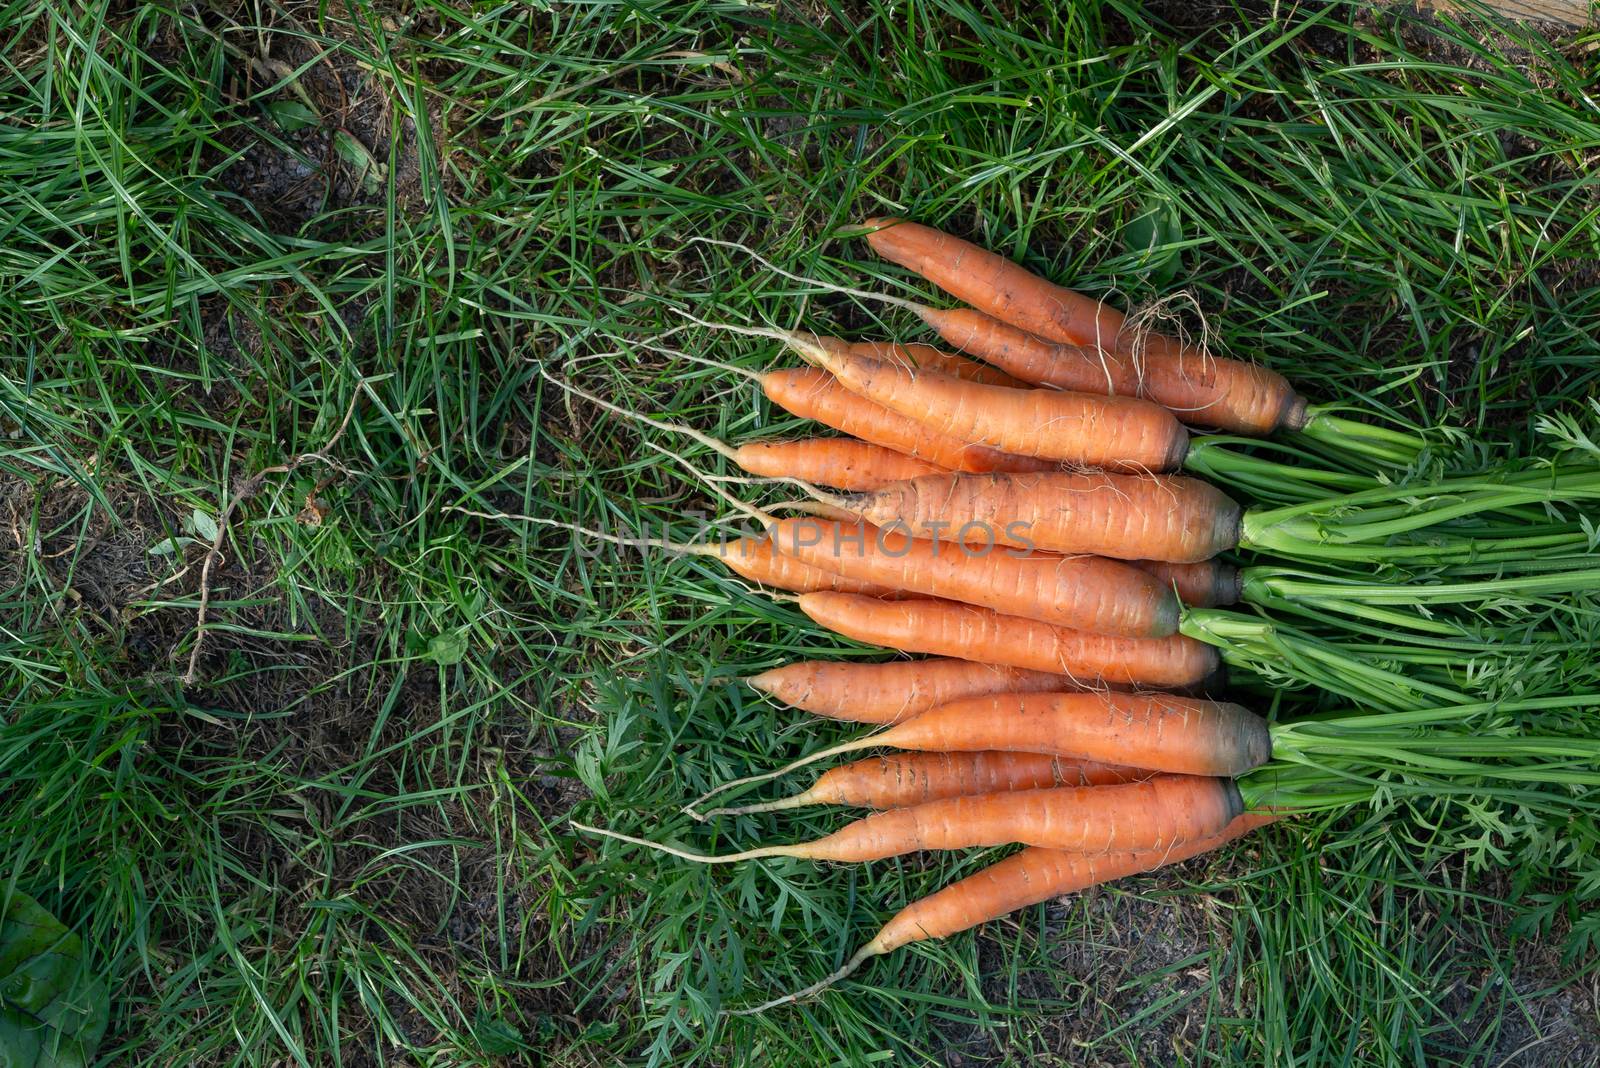 Bunch of fresh carrots with tops on the grass next to the garden bed, top veiw, copy space.